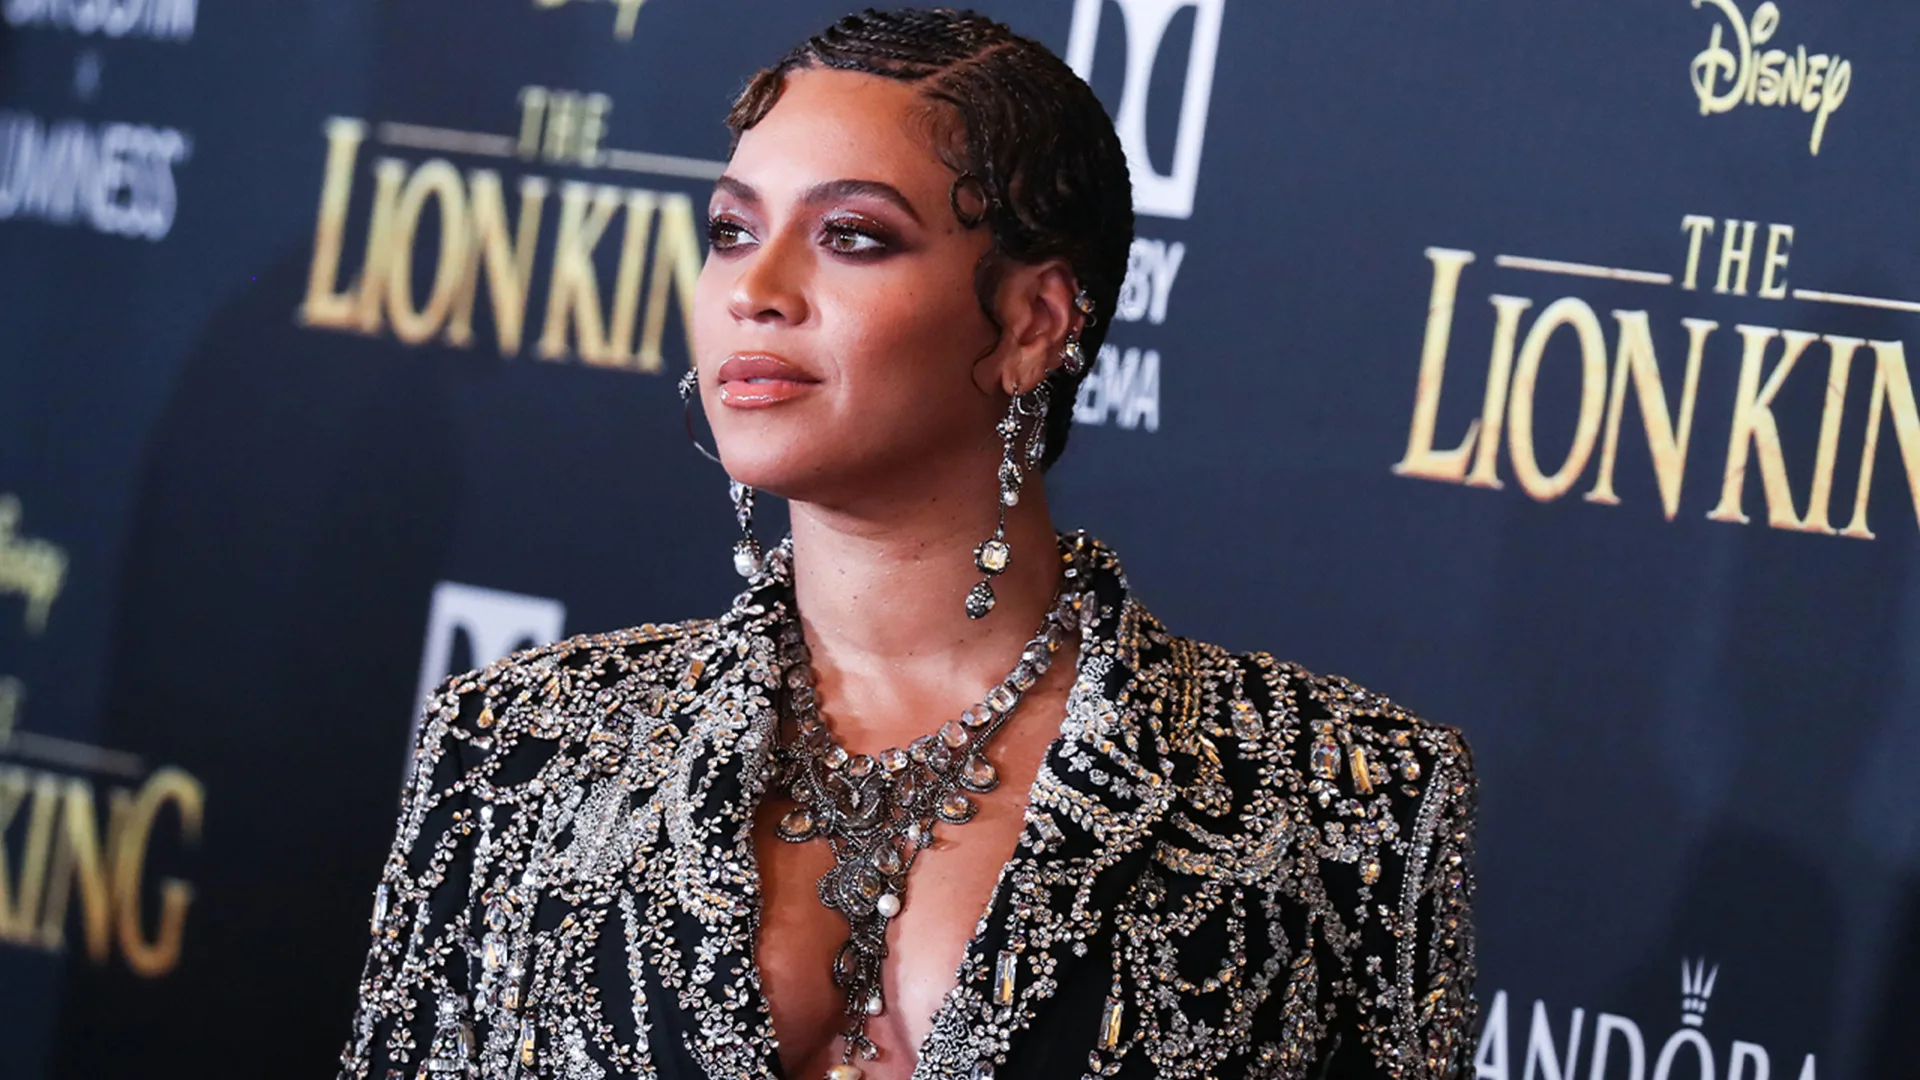 Beyonce at the premiere of the Lion King